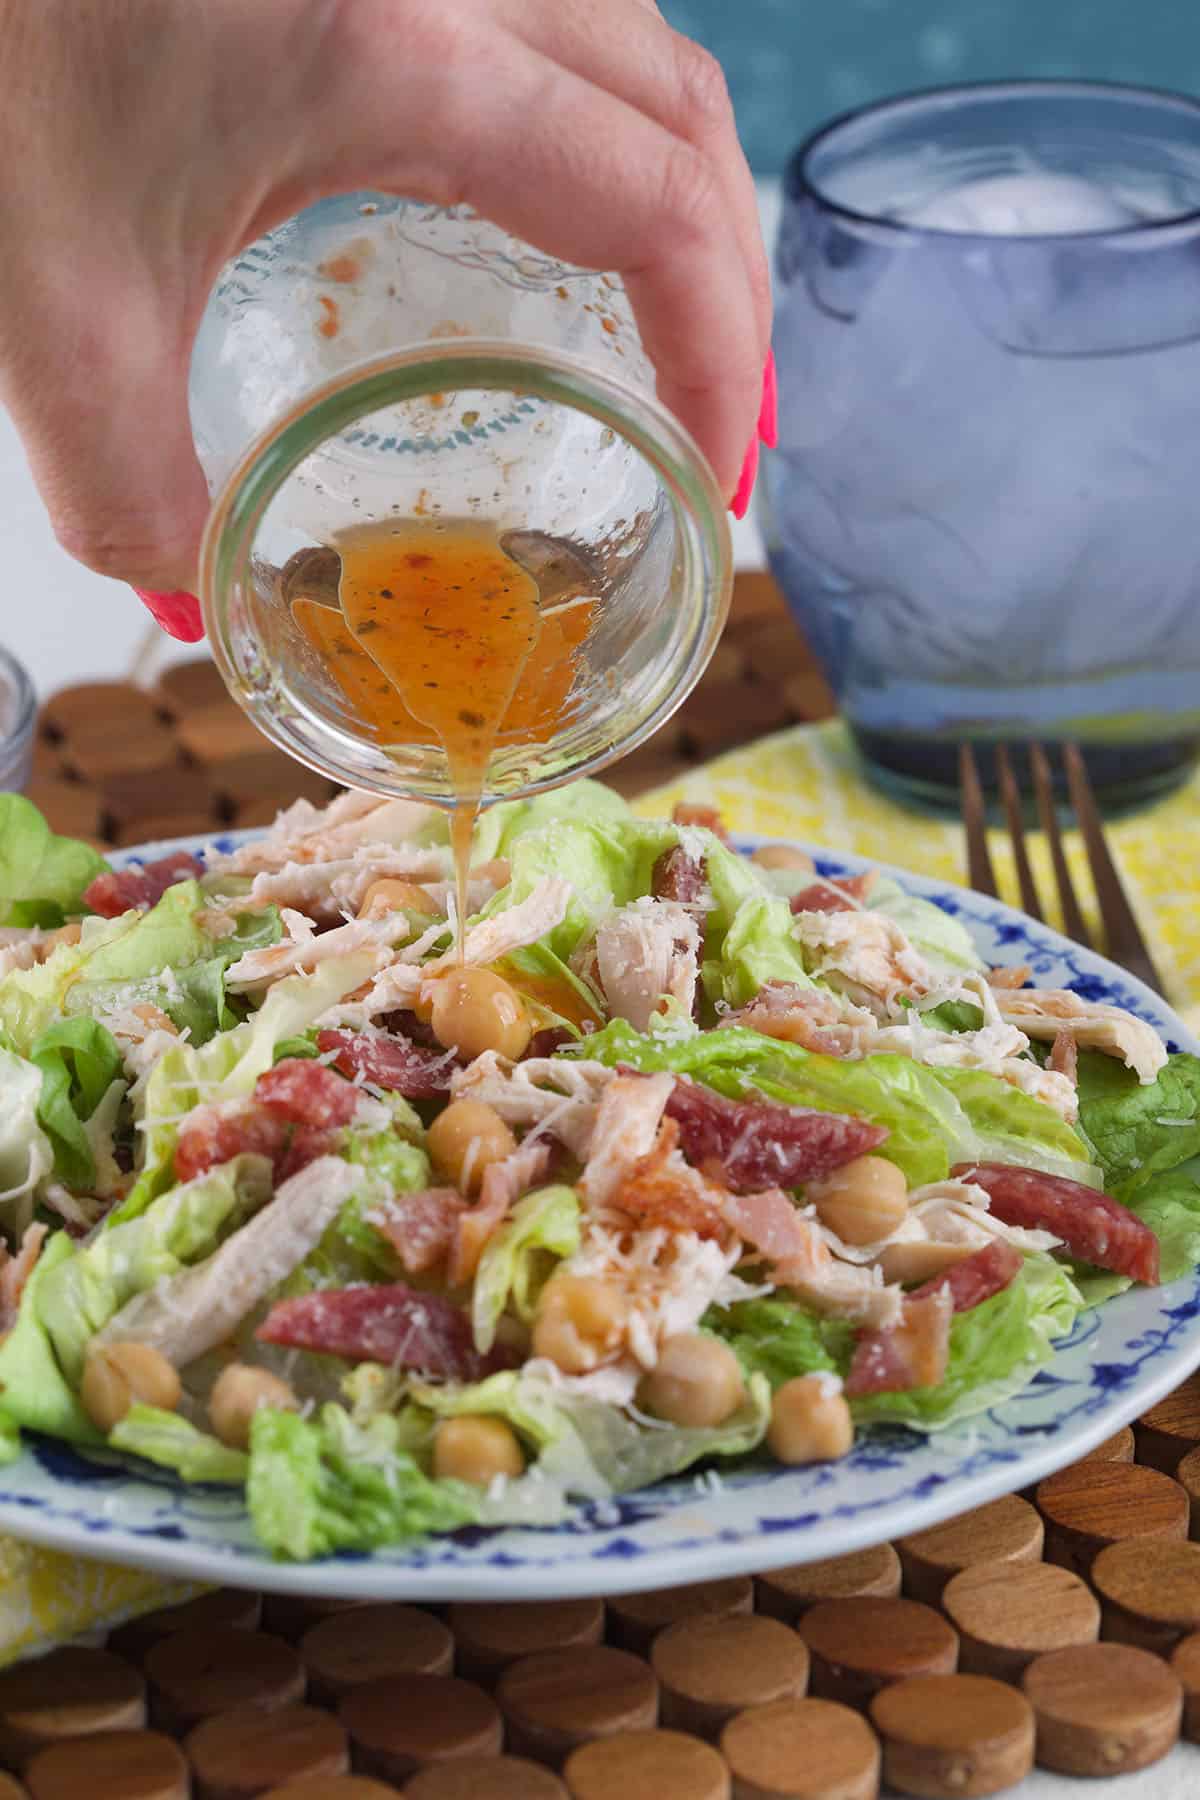 Dressing is being poured on top of a tossed salad.